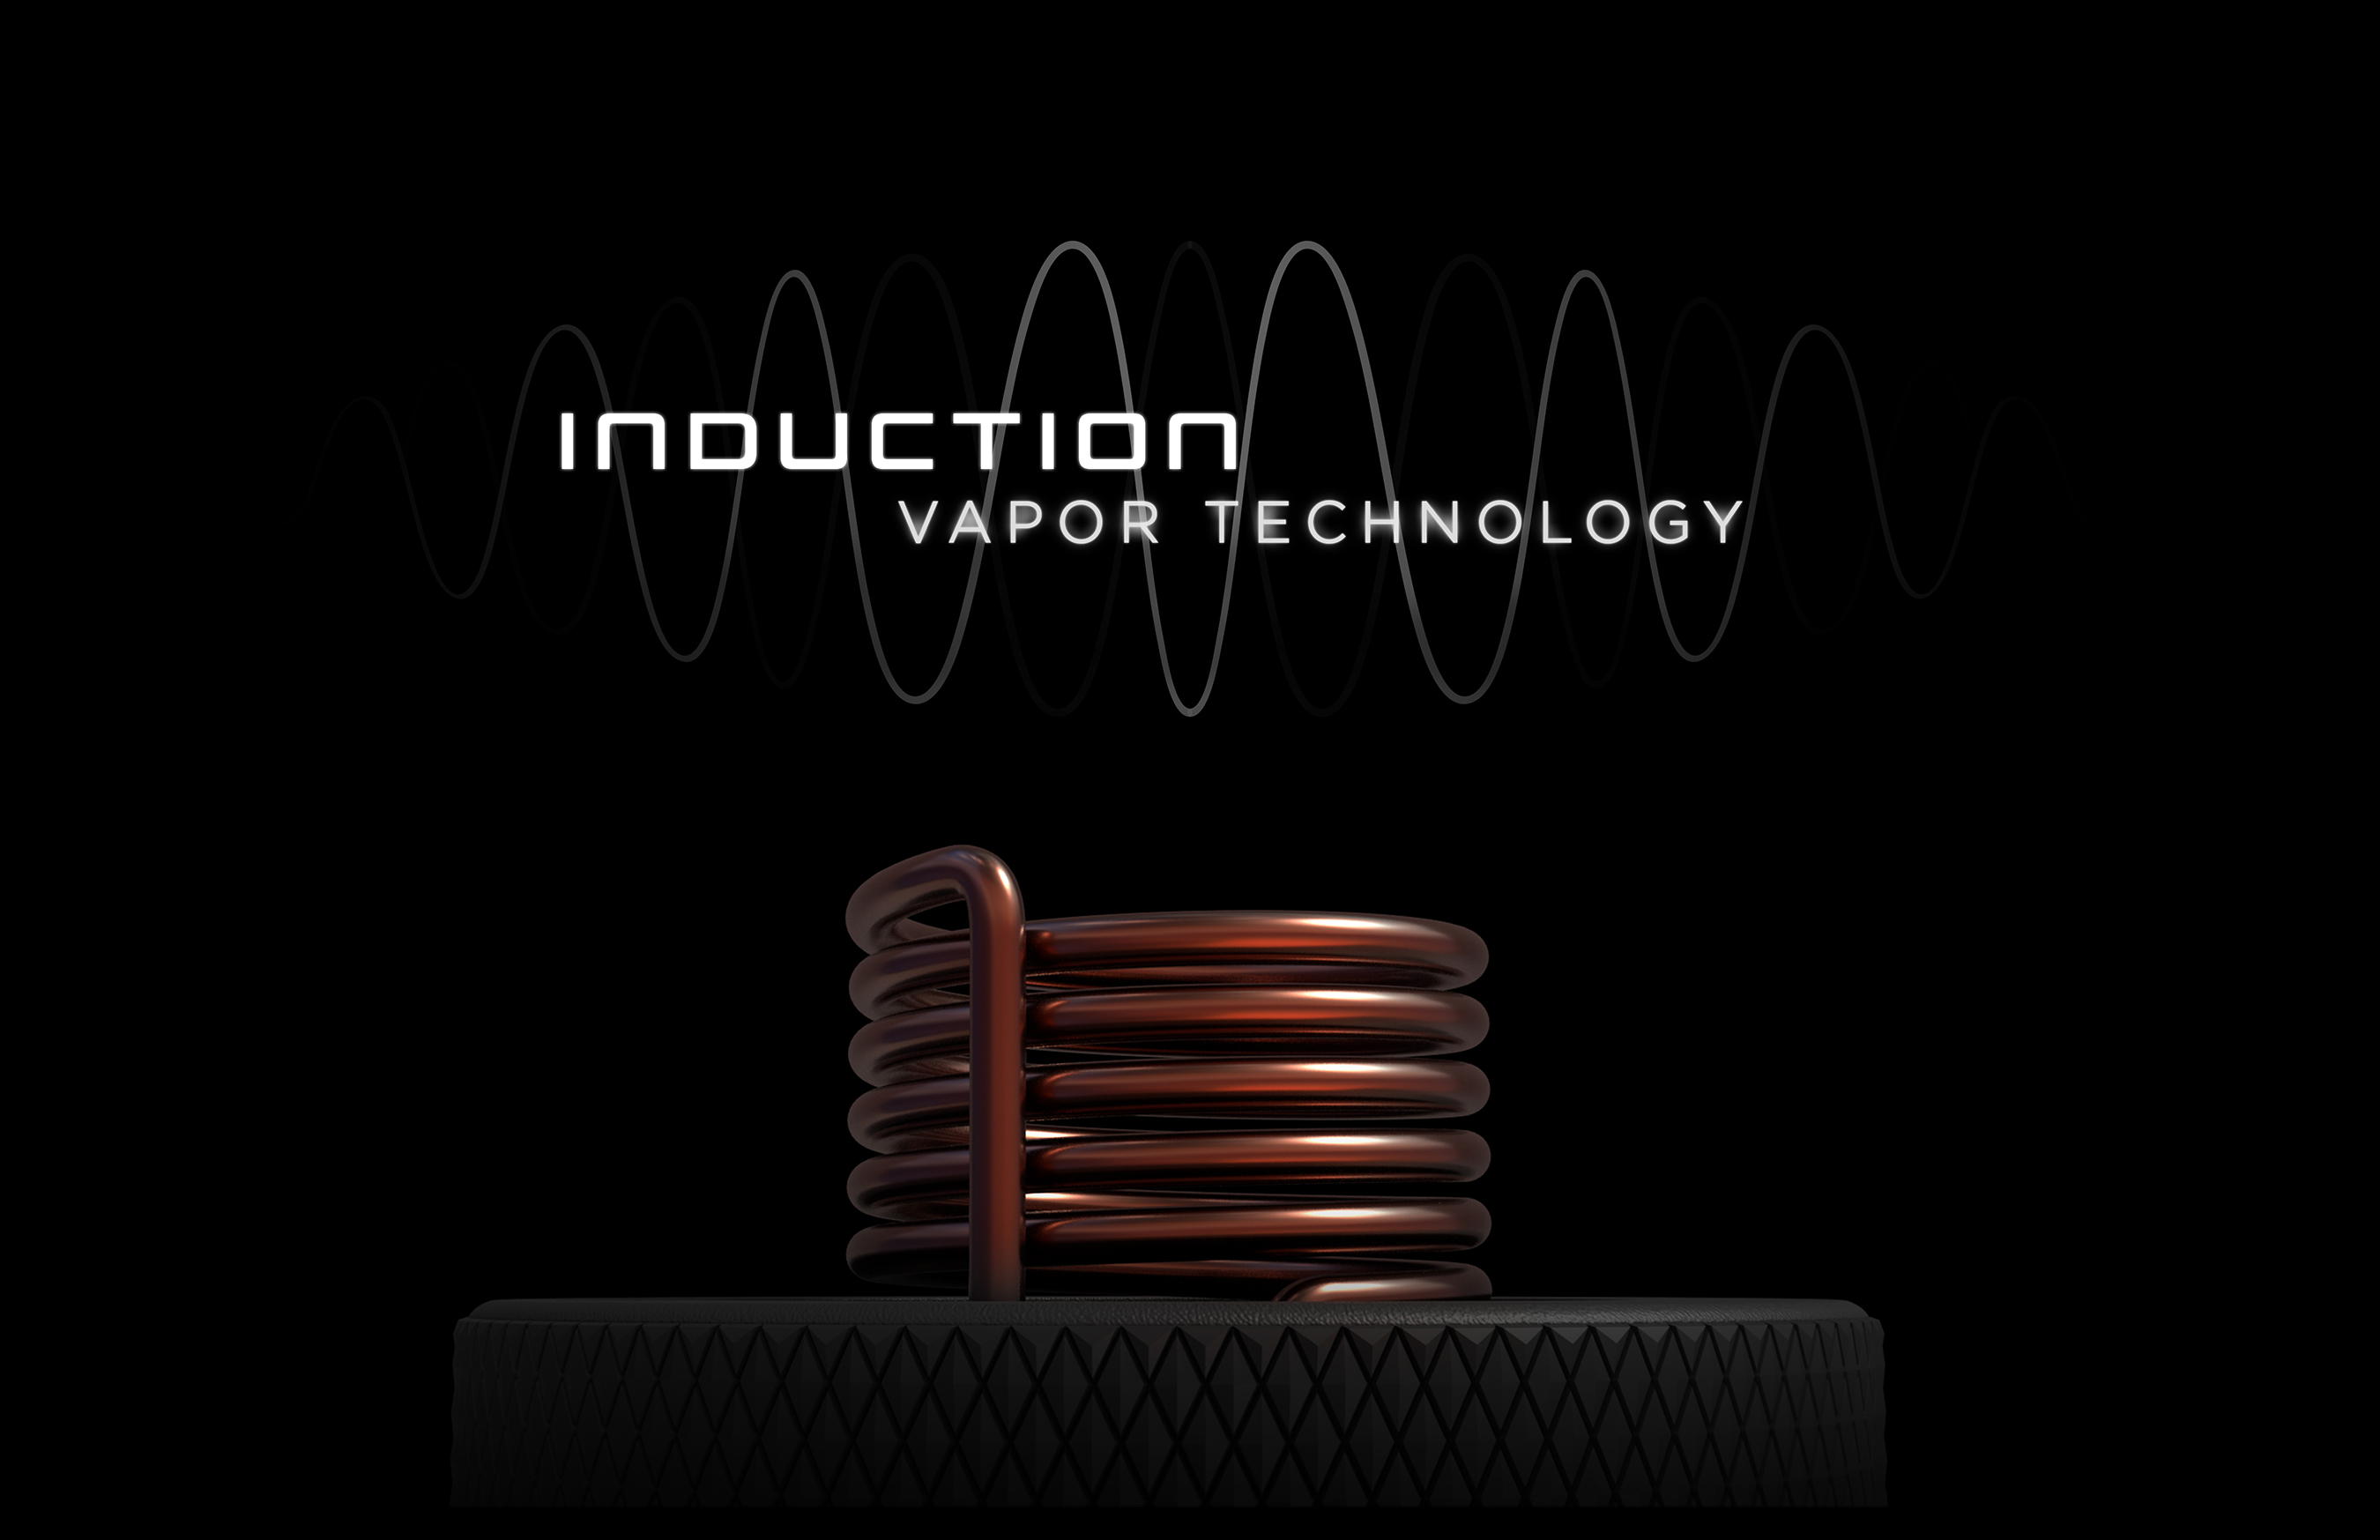 The SWITCH’s Induction Vapor Technology produces a uniform electromagnetic field to indirectly heat material within a sealed chamber, so there's no concern over hot spots, irregular flavor, wait times, or combustion and oxidation of material.